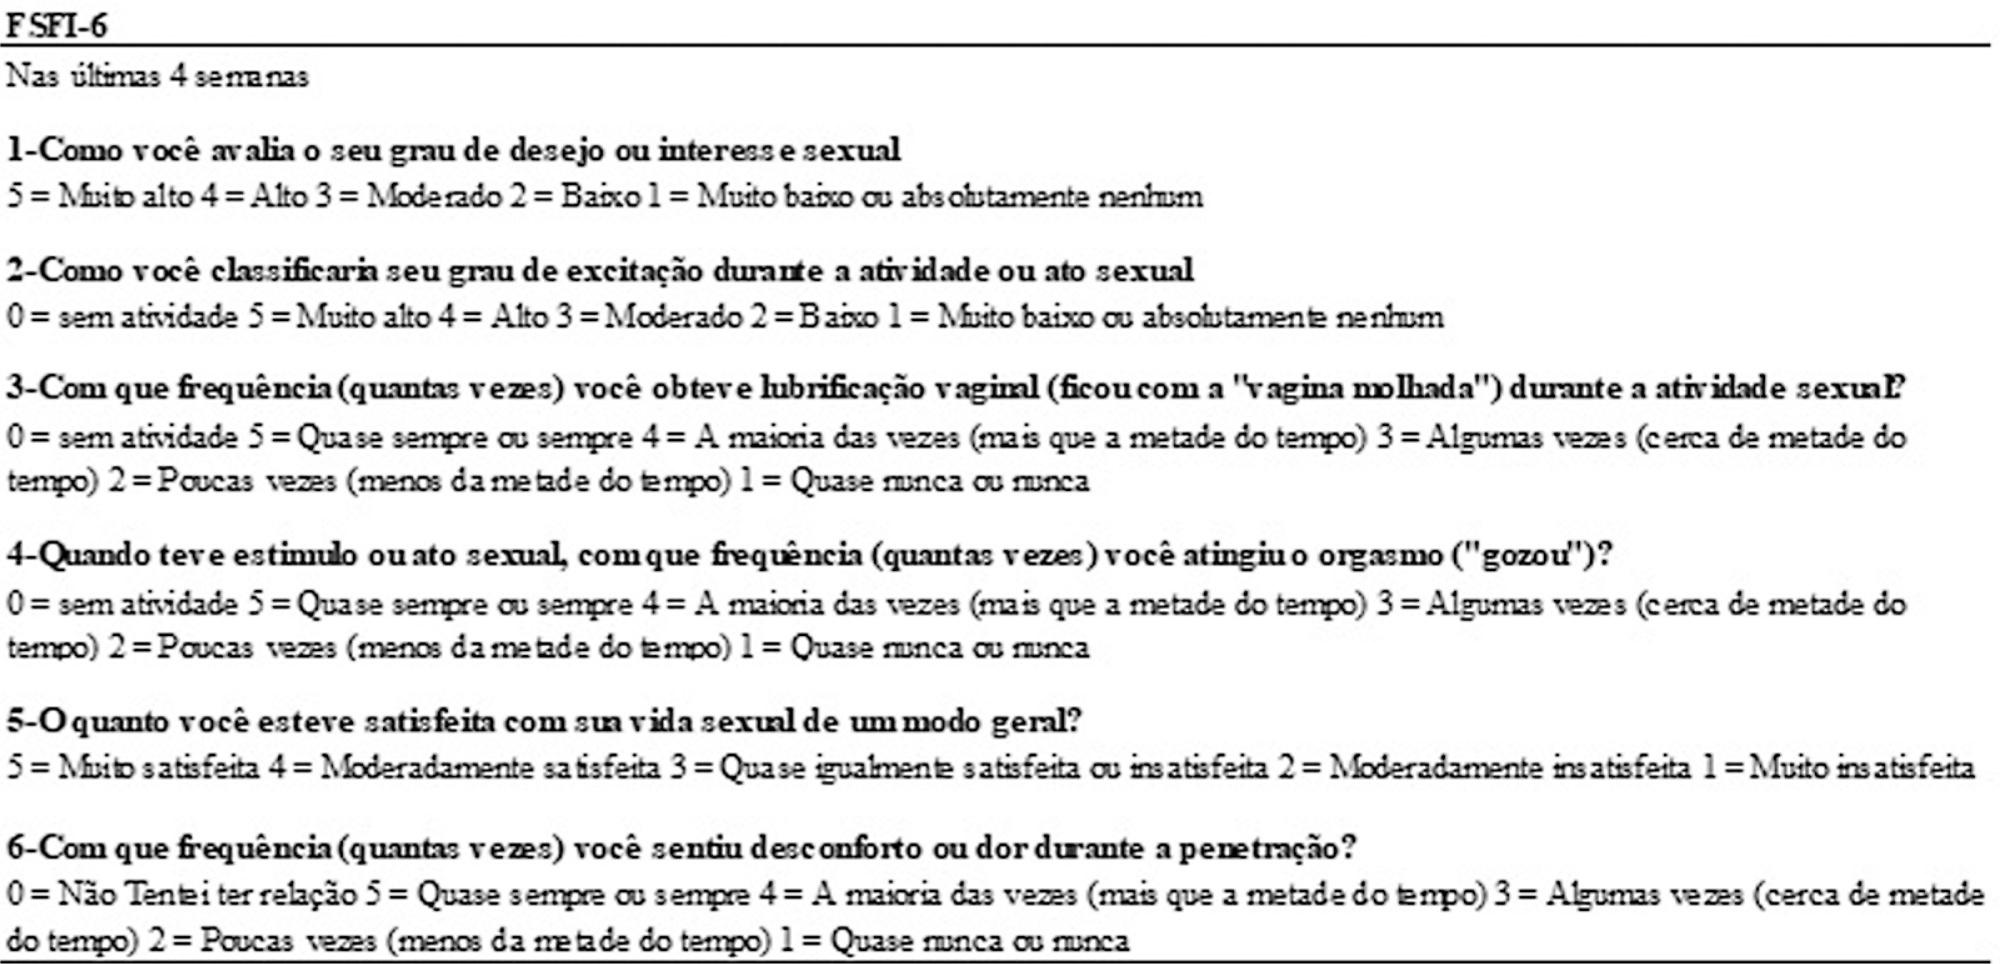 Analysis of the Measurement Properties of the Female Sexual Function Index 6-item Version (FSFI-6) in a Postpartum Brazilian Population